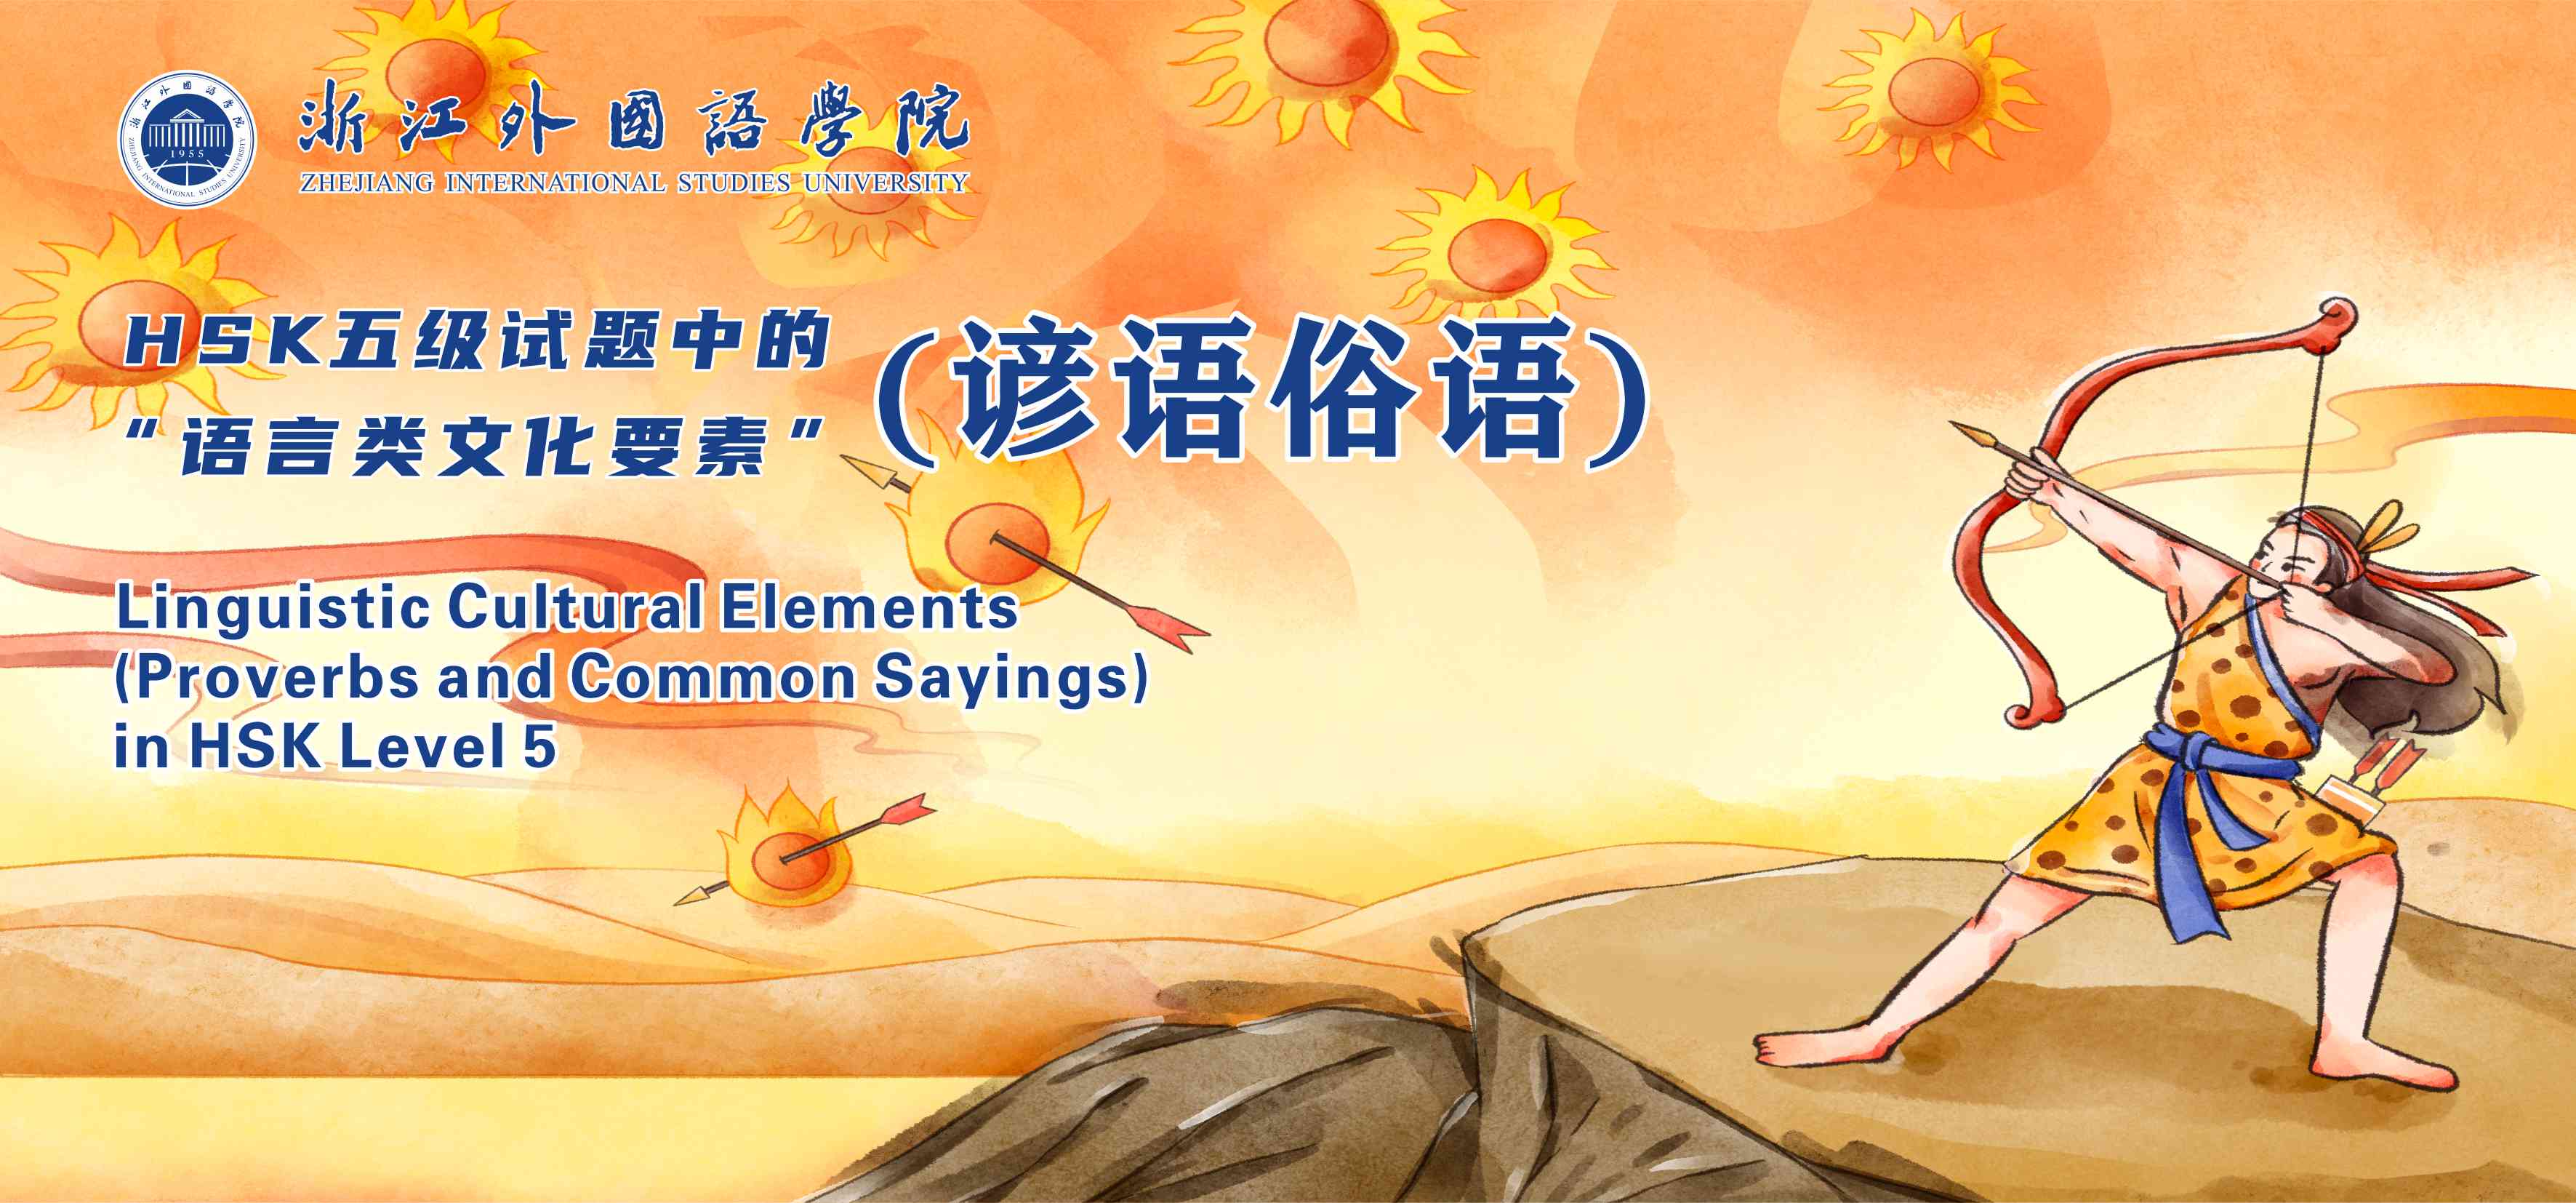 Linguistic Cultural Elements (Proverbs and Common Sayings) in HSK Level 5